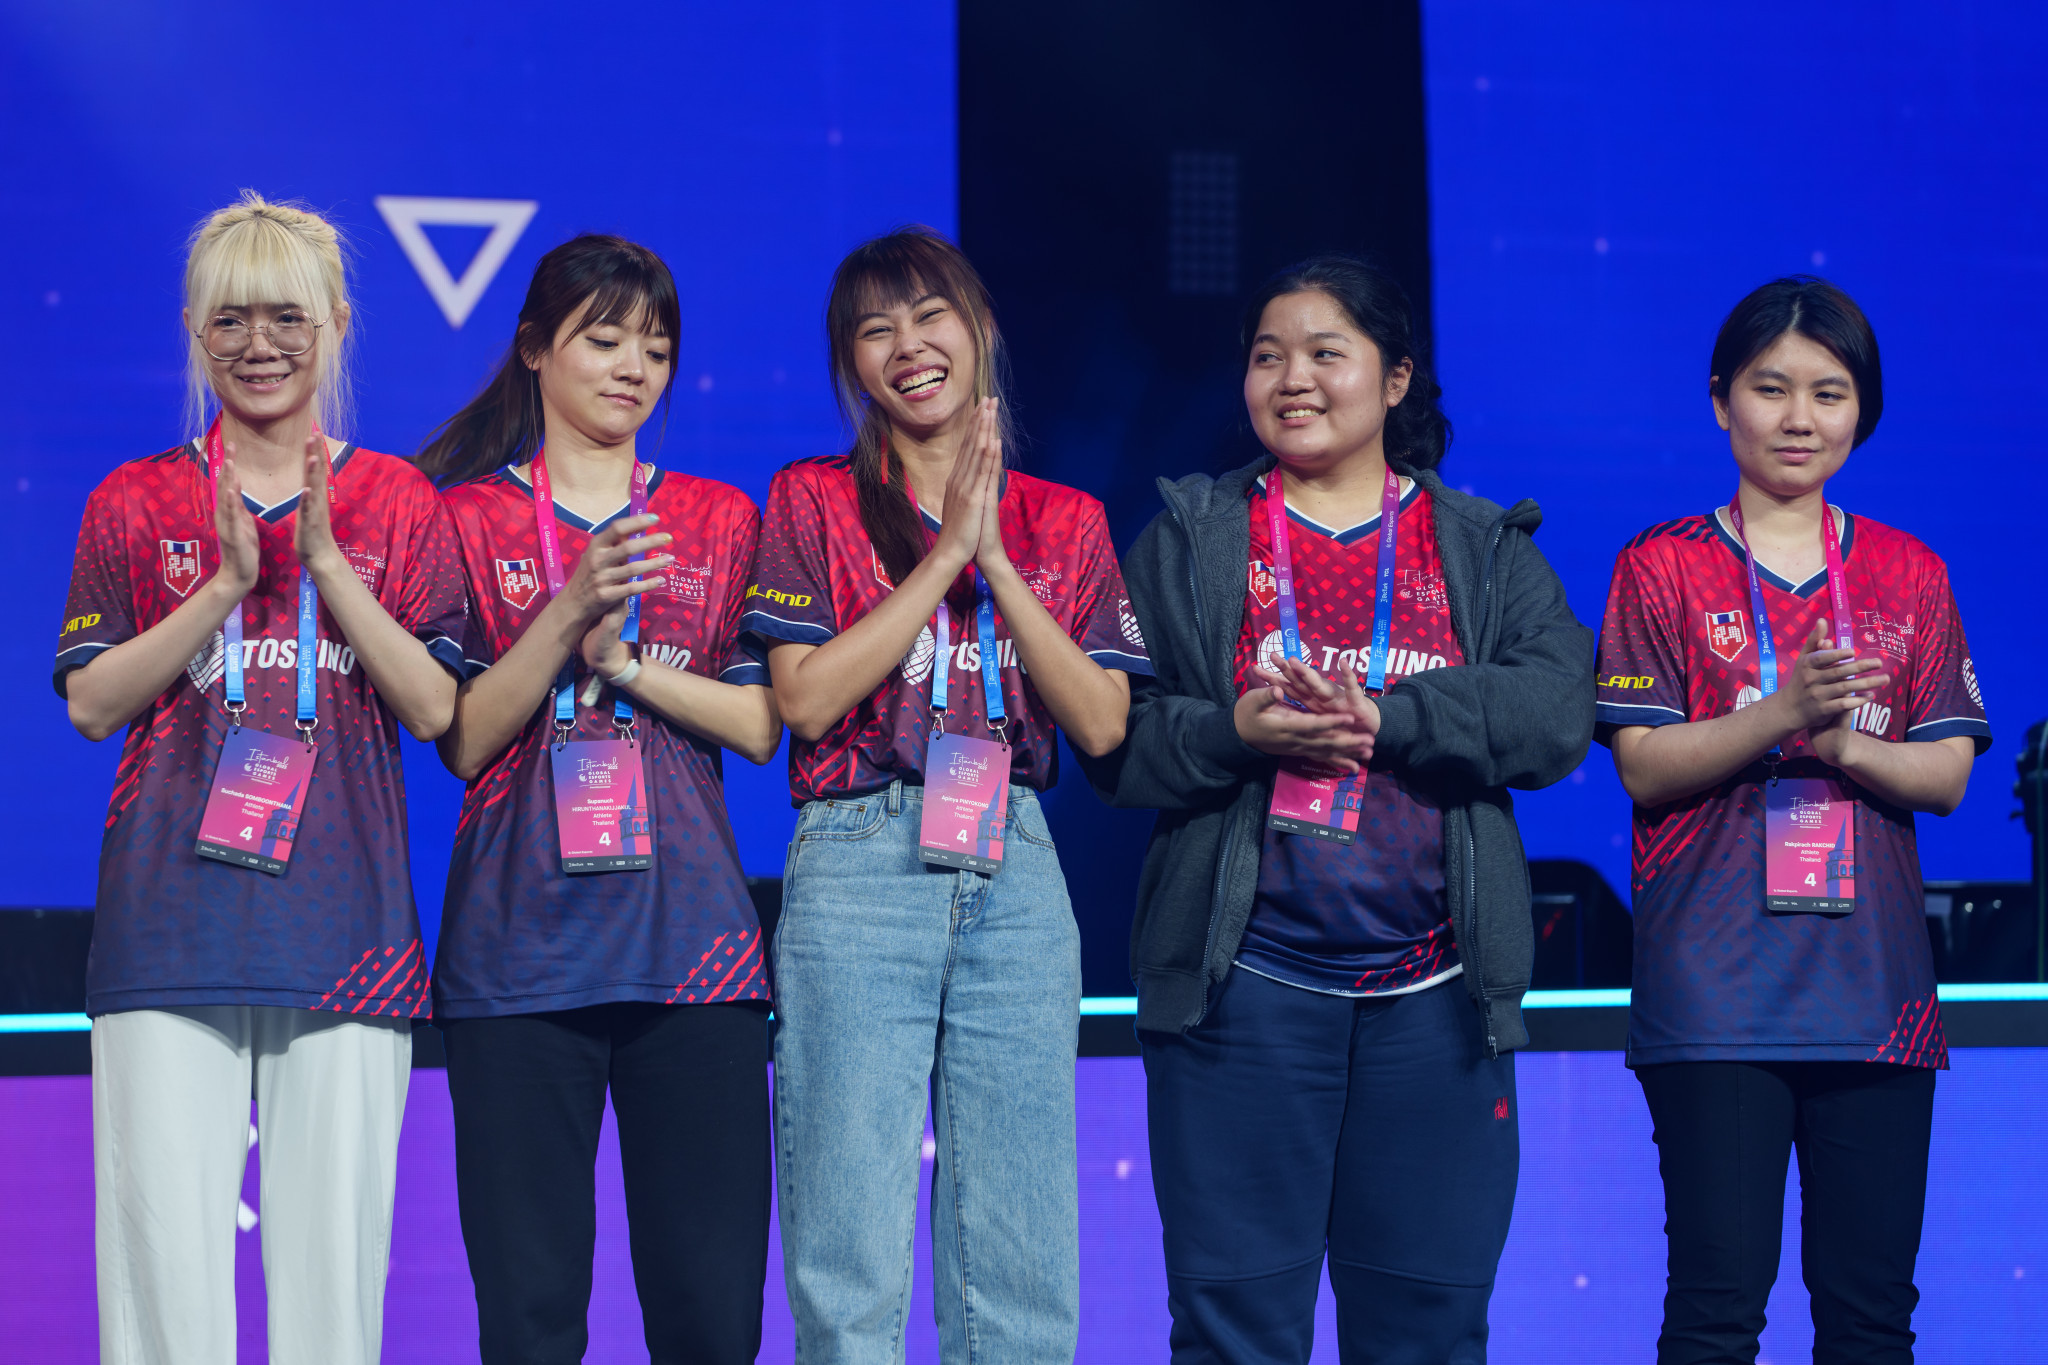 Thailand steamroll competition to win first Global Esports Games gold medal